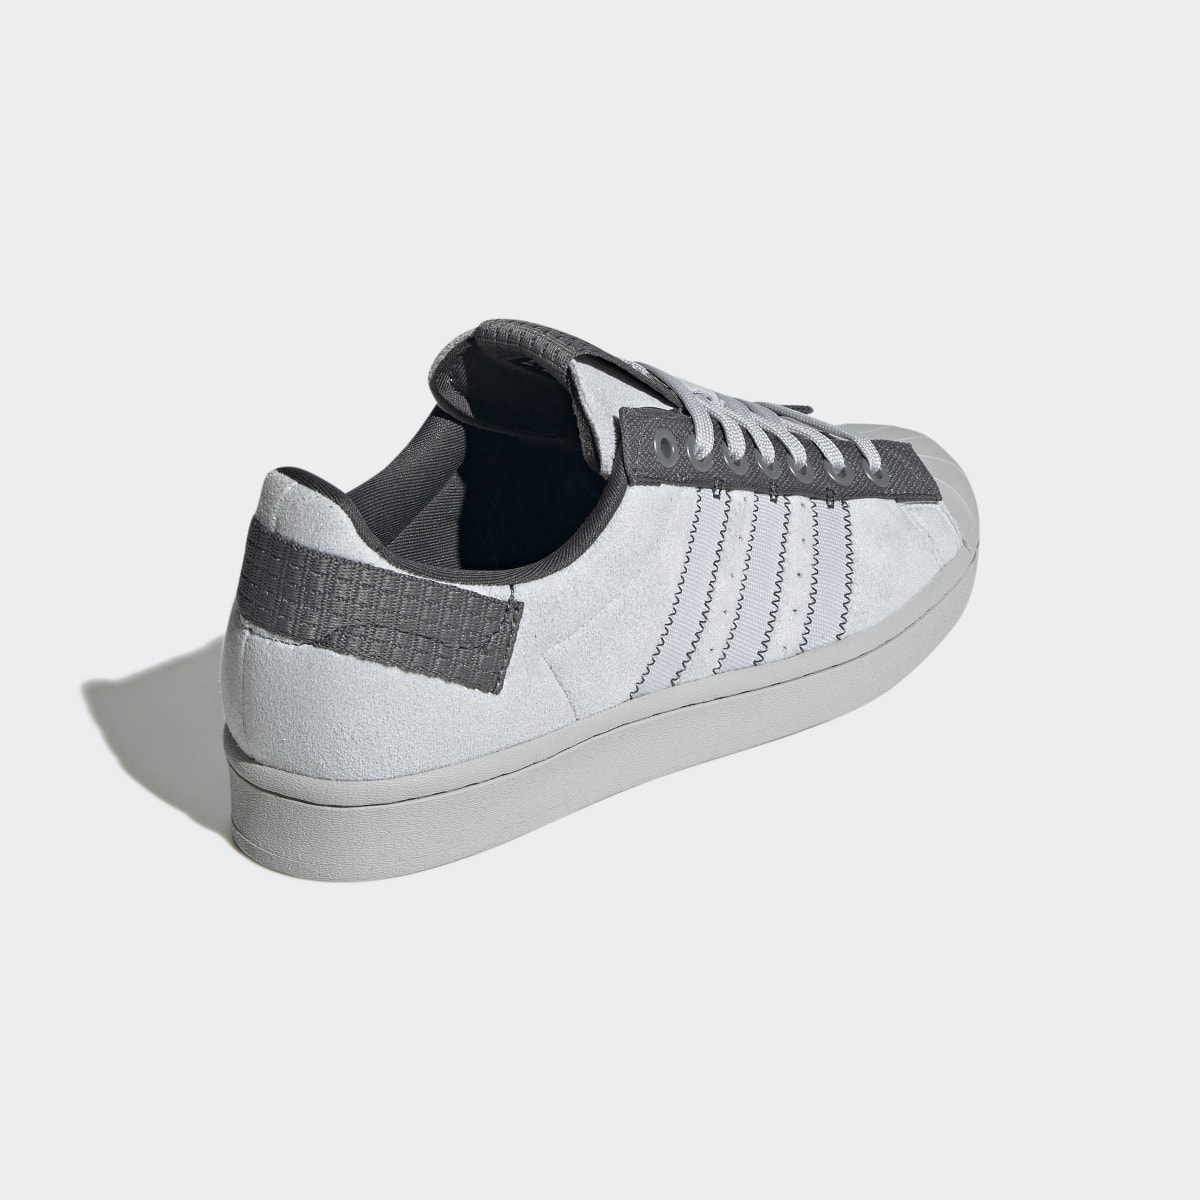 Adidas Superstar Parley Shoes. 9